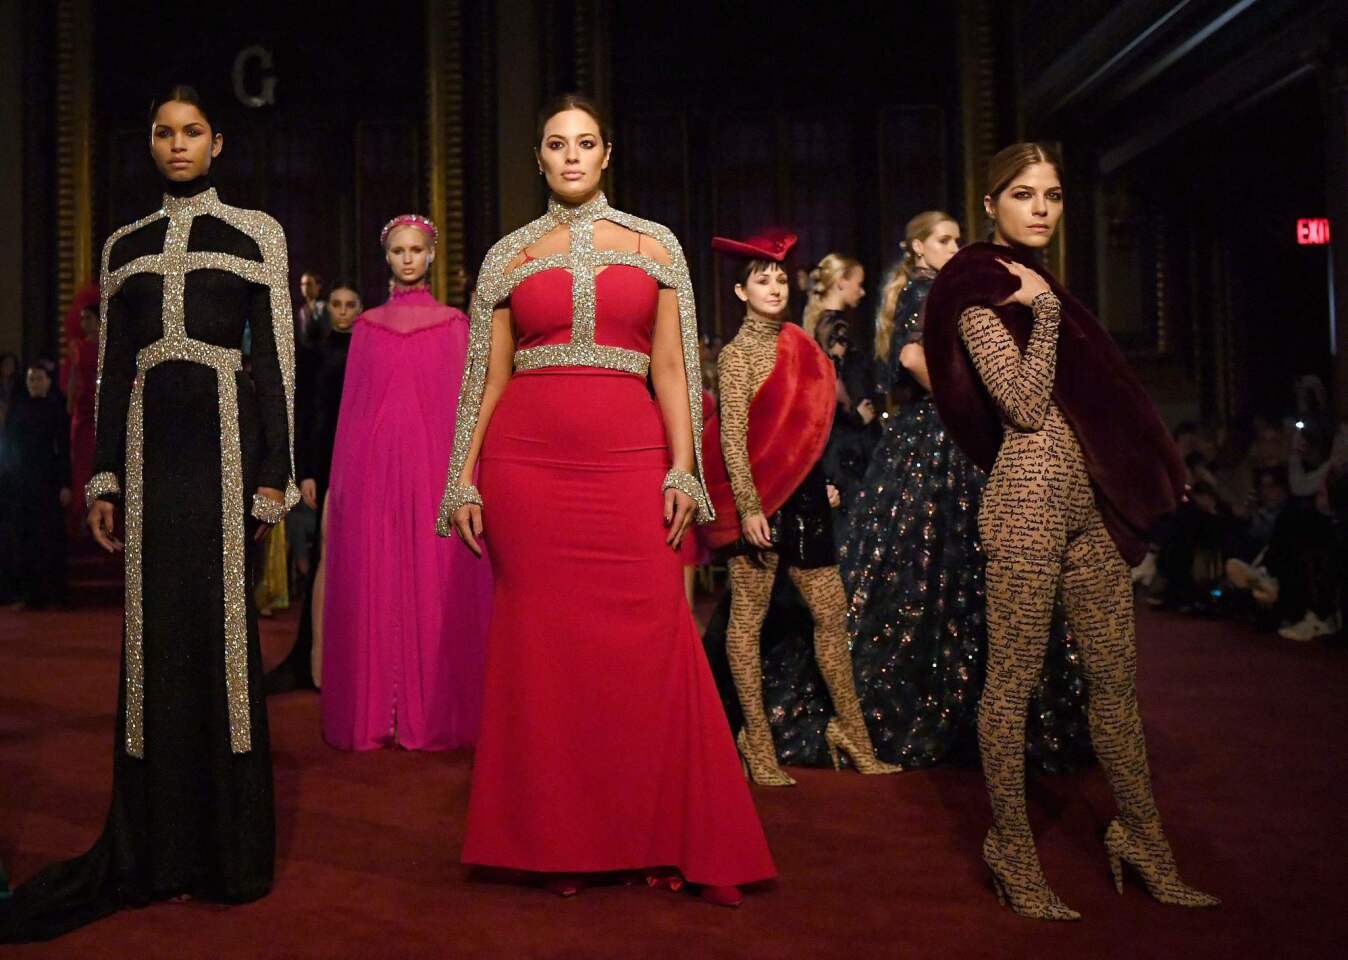 Christian Siriano's fall 2018 collection